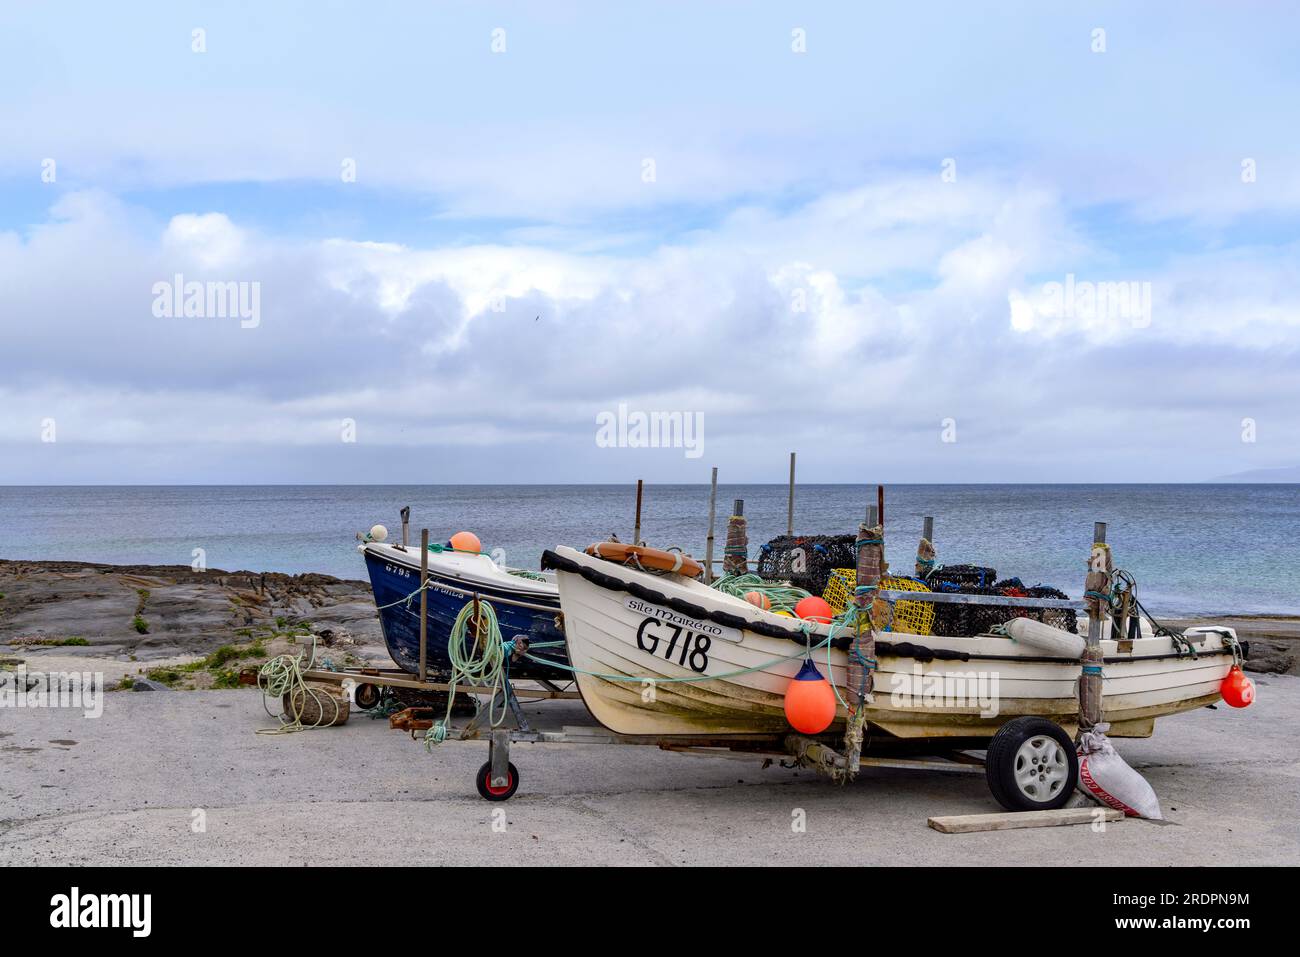 Fishing boats on the shore of Inis Oirr or Inisheer, the smallest of the three Aran Islands, Galway Bay, West Ireland. Stock Photo